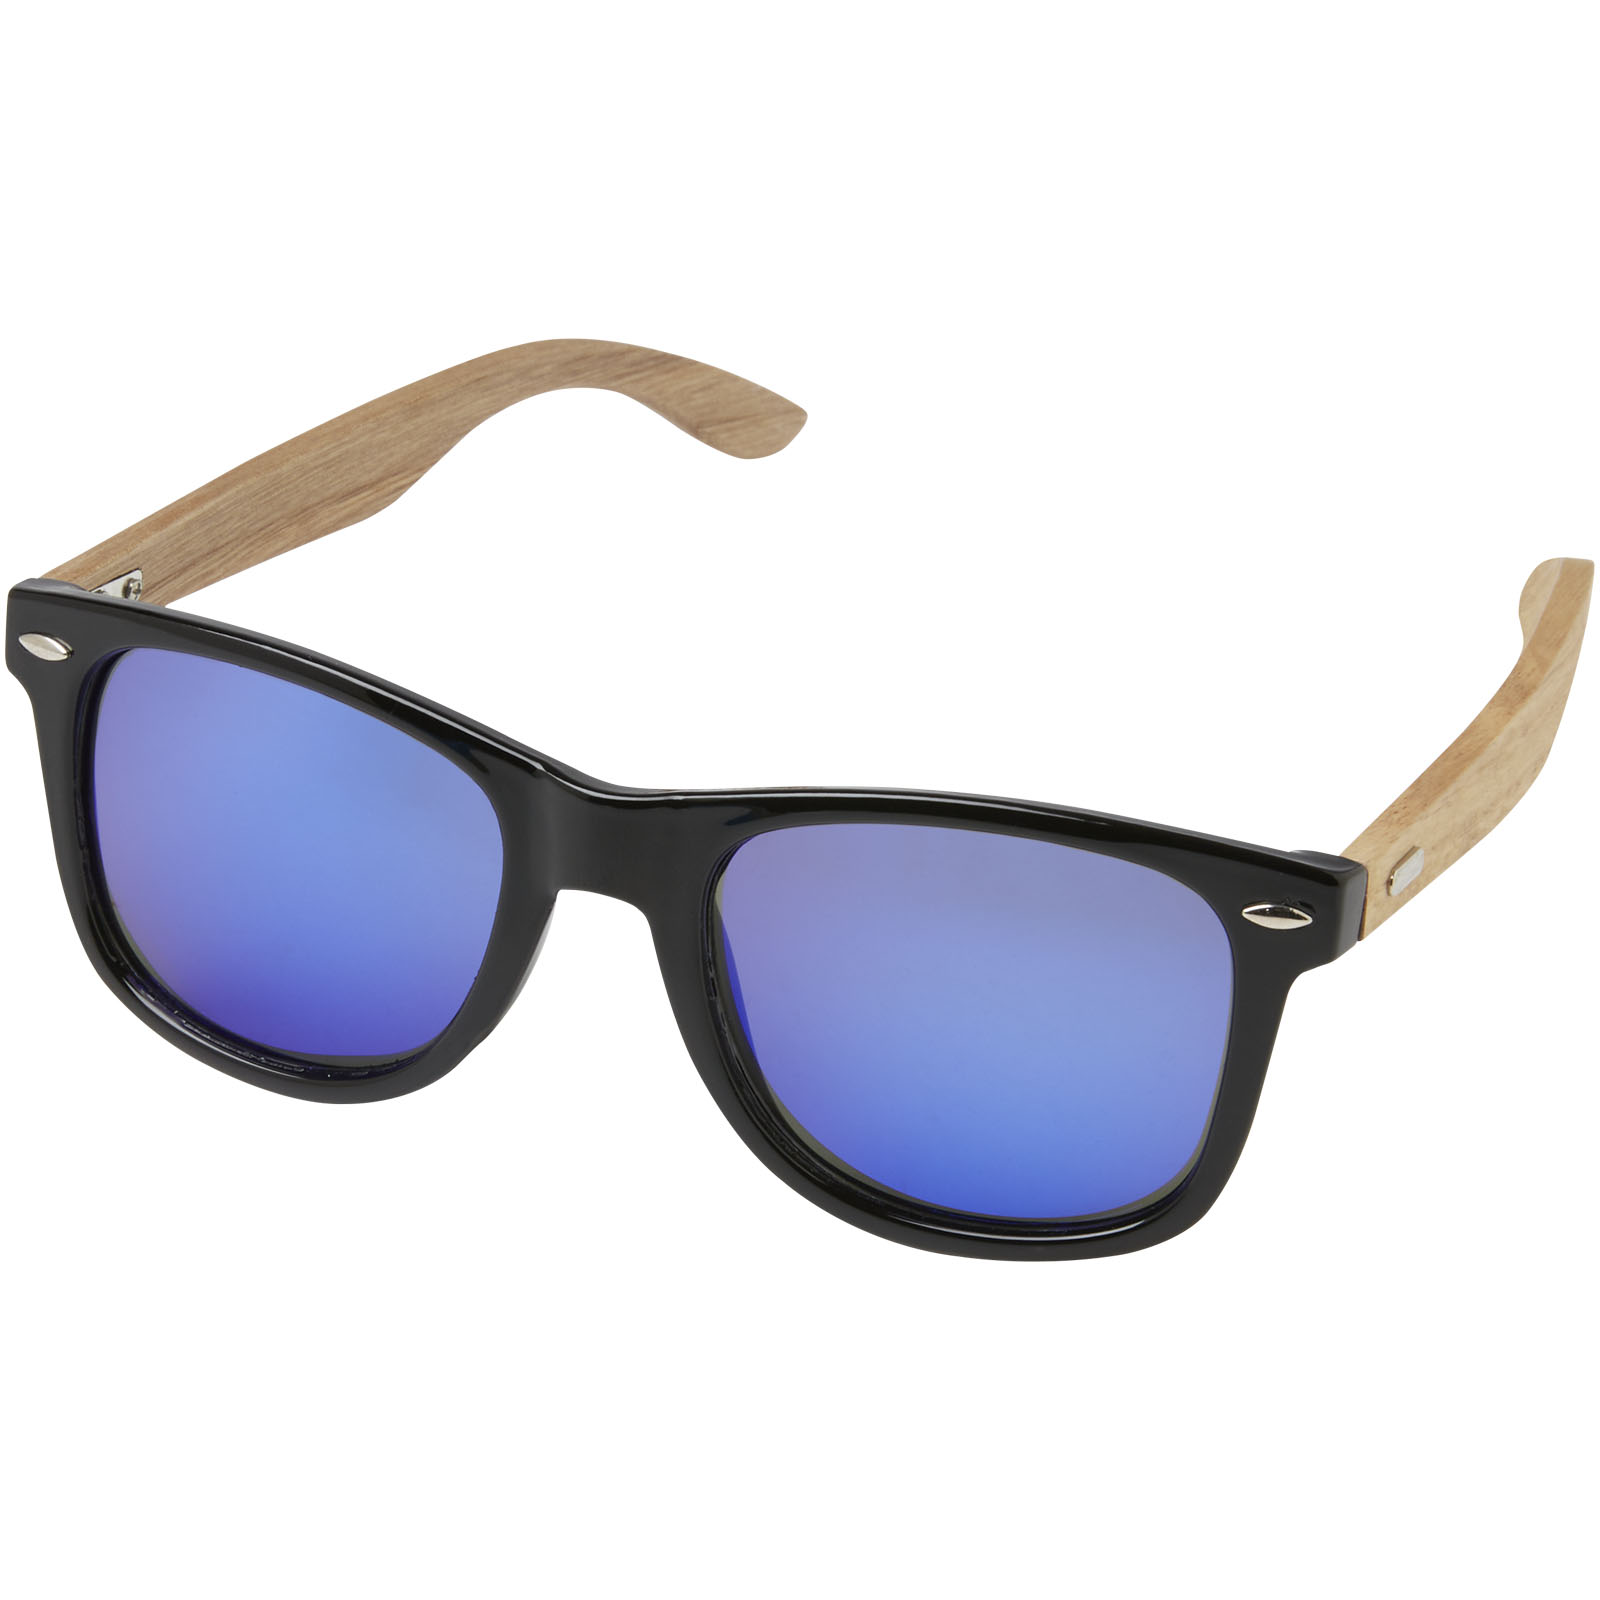 Plastic sunglasses CELL with wood feet - wood